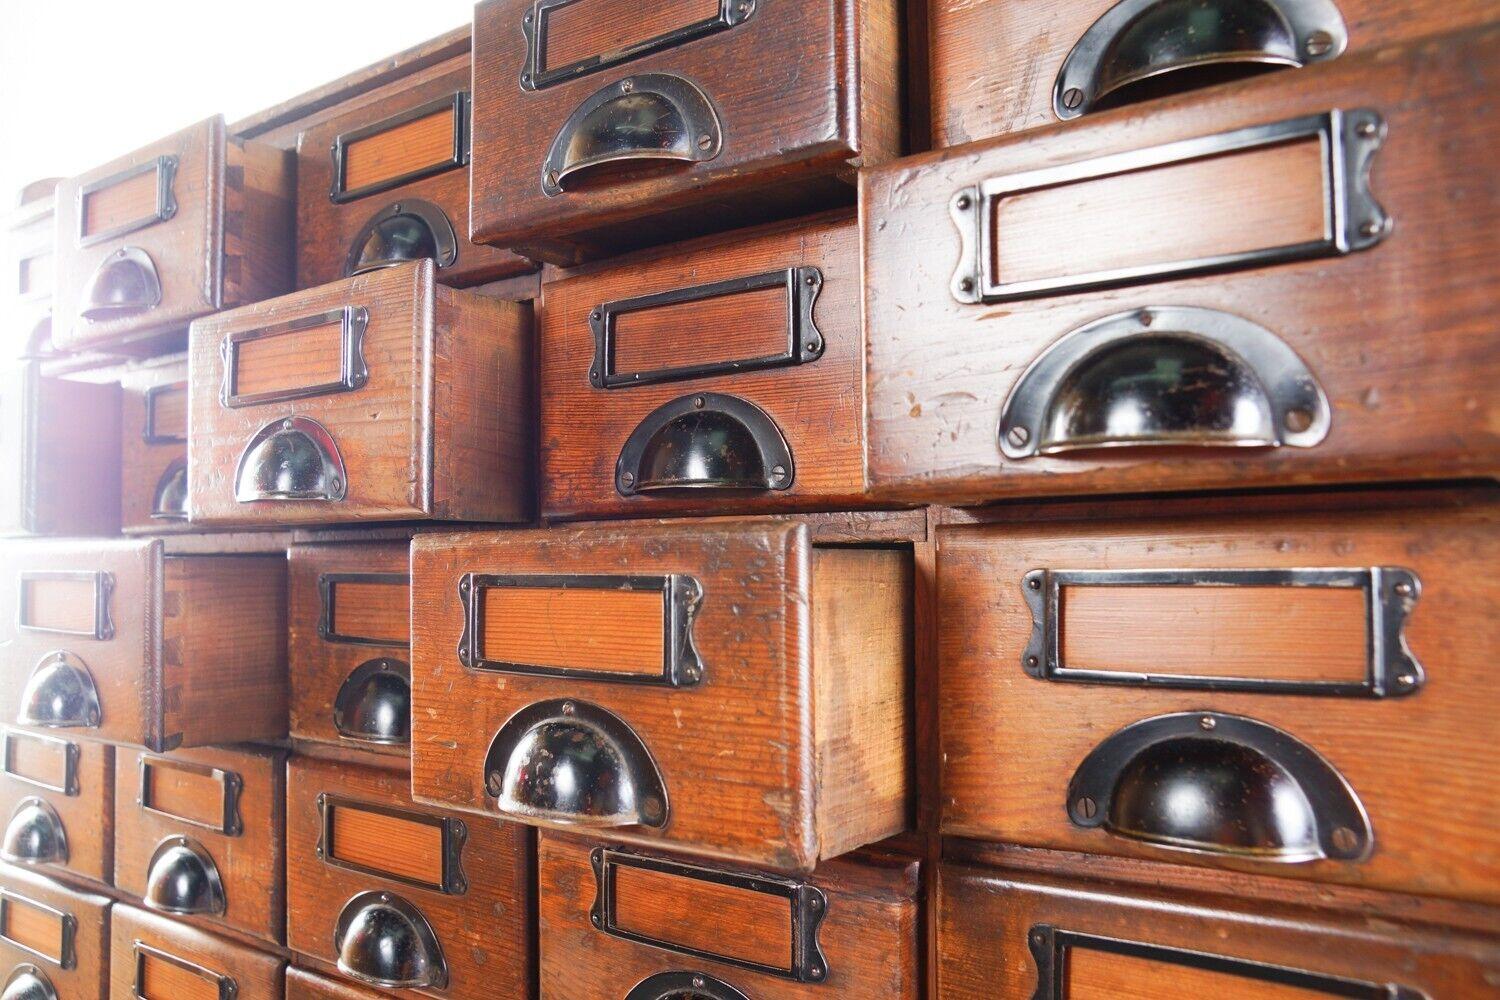 Vintage Early 20th Century Haberdashery or Office Organiser Bank of Drawers

A large, stained pine haberdashery or office drawer unit that splits into two, 
which was produced in the early 20th century, and will serve as a talking point wherever it